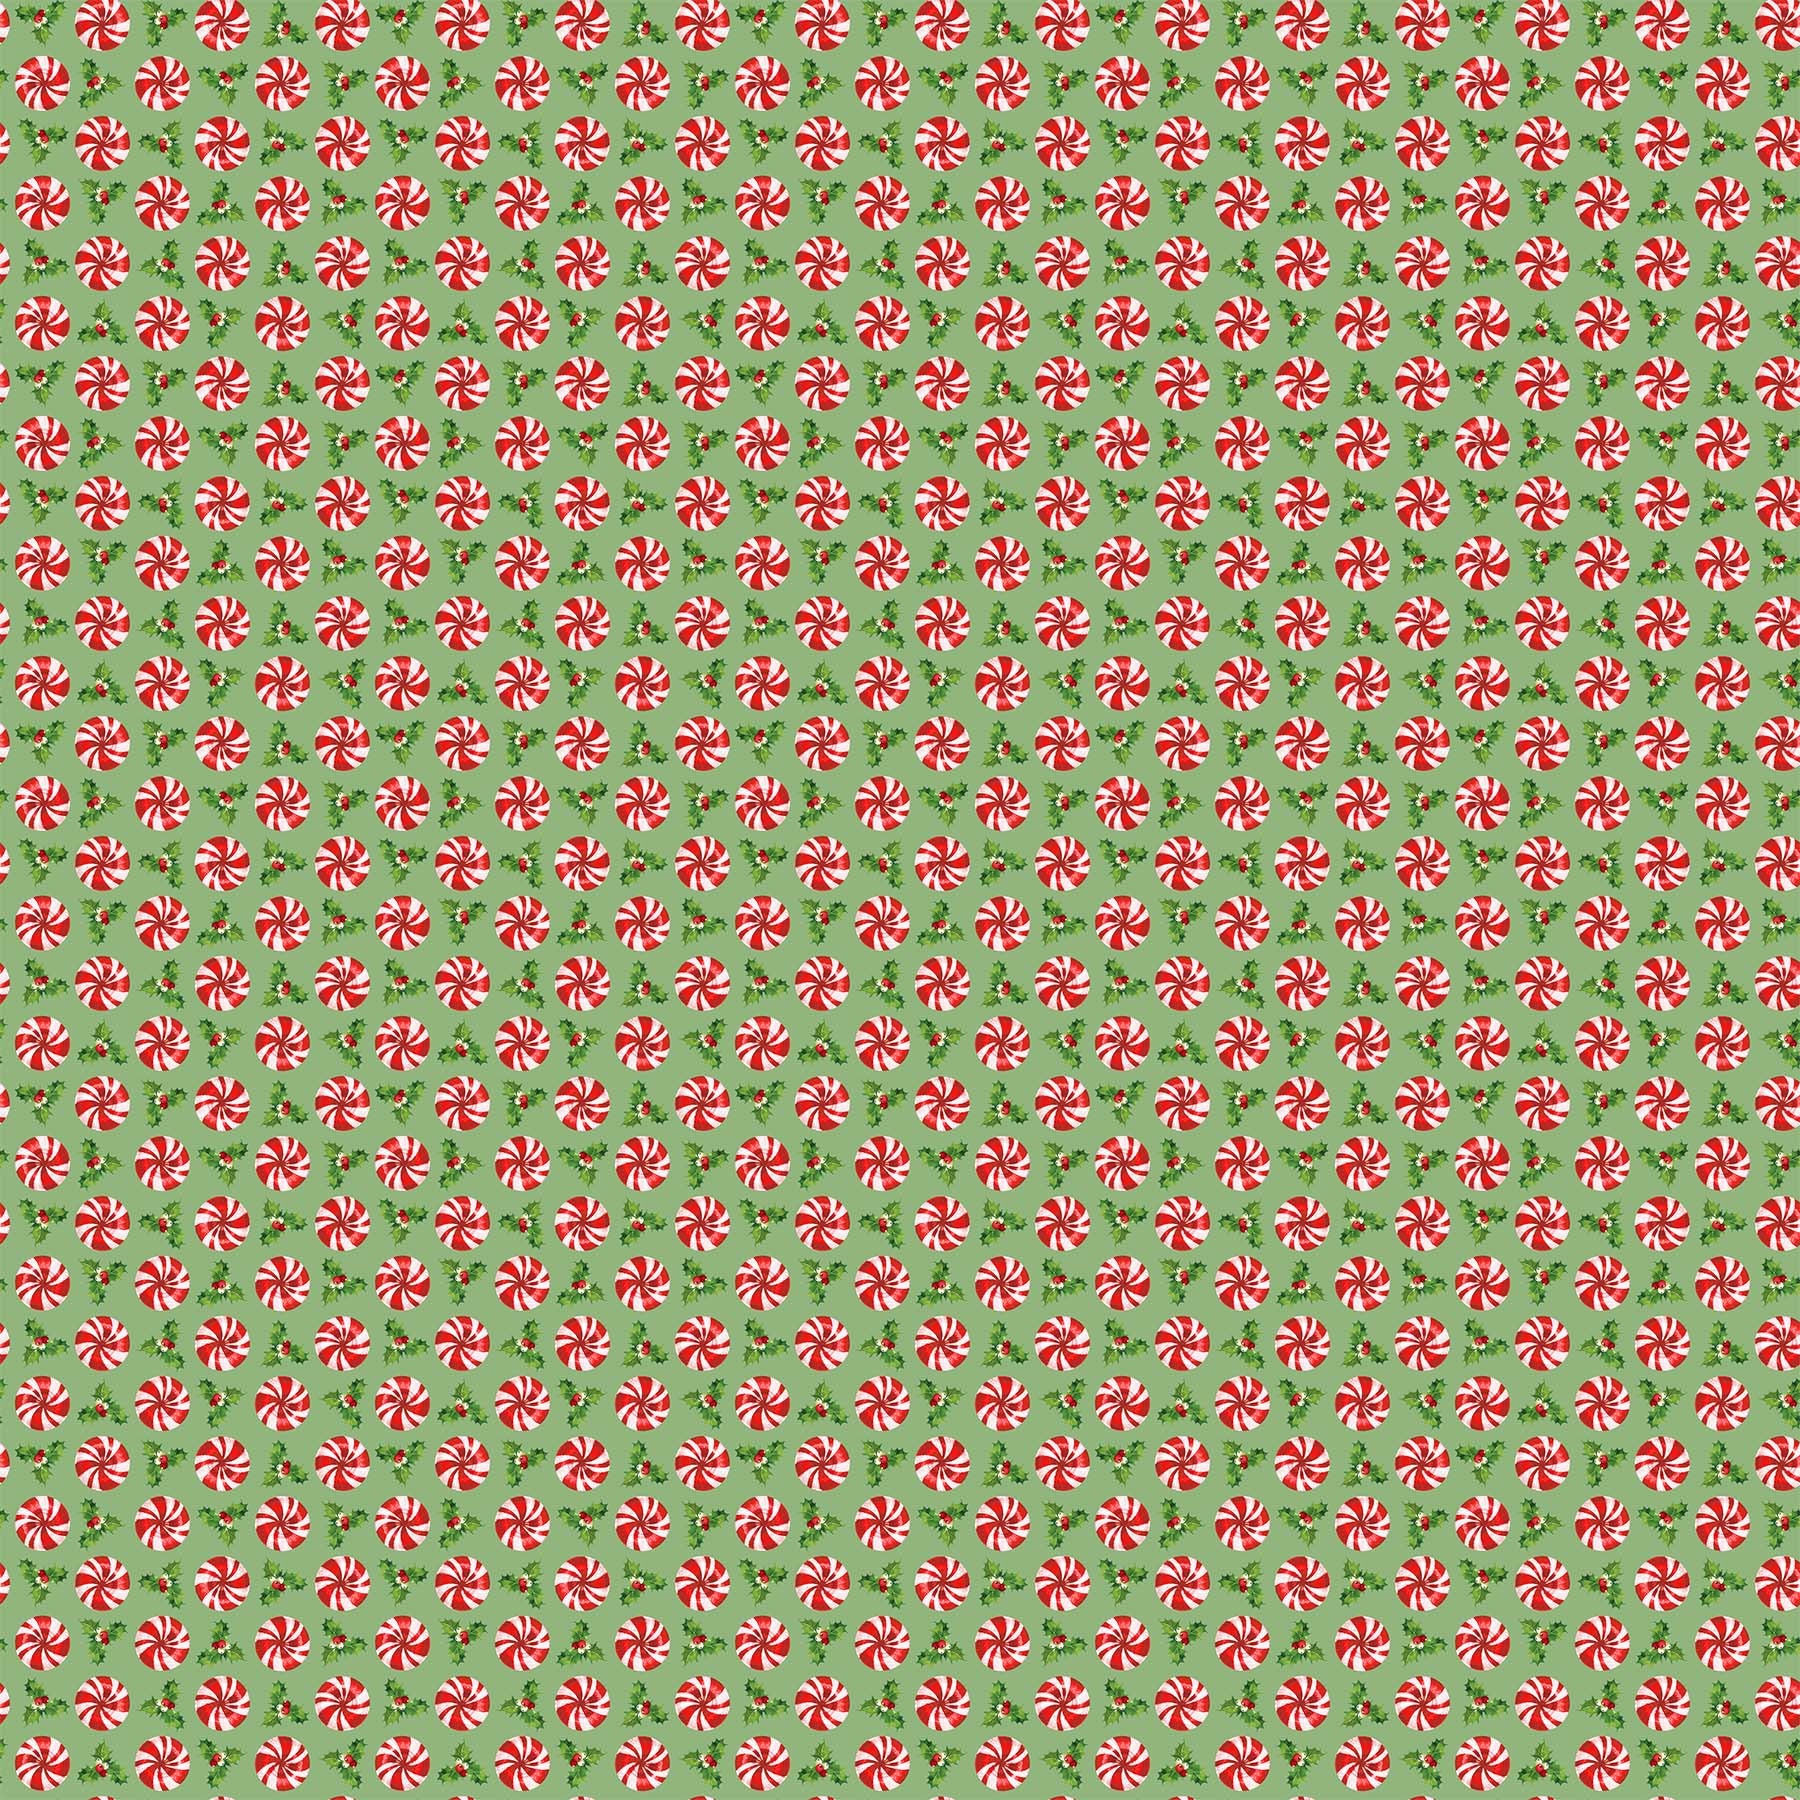 Peppermint Candy - Candy Grid - Green Multi